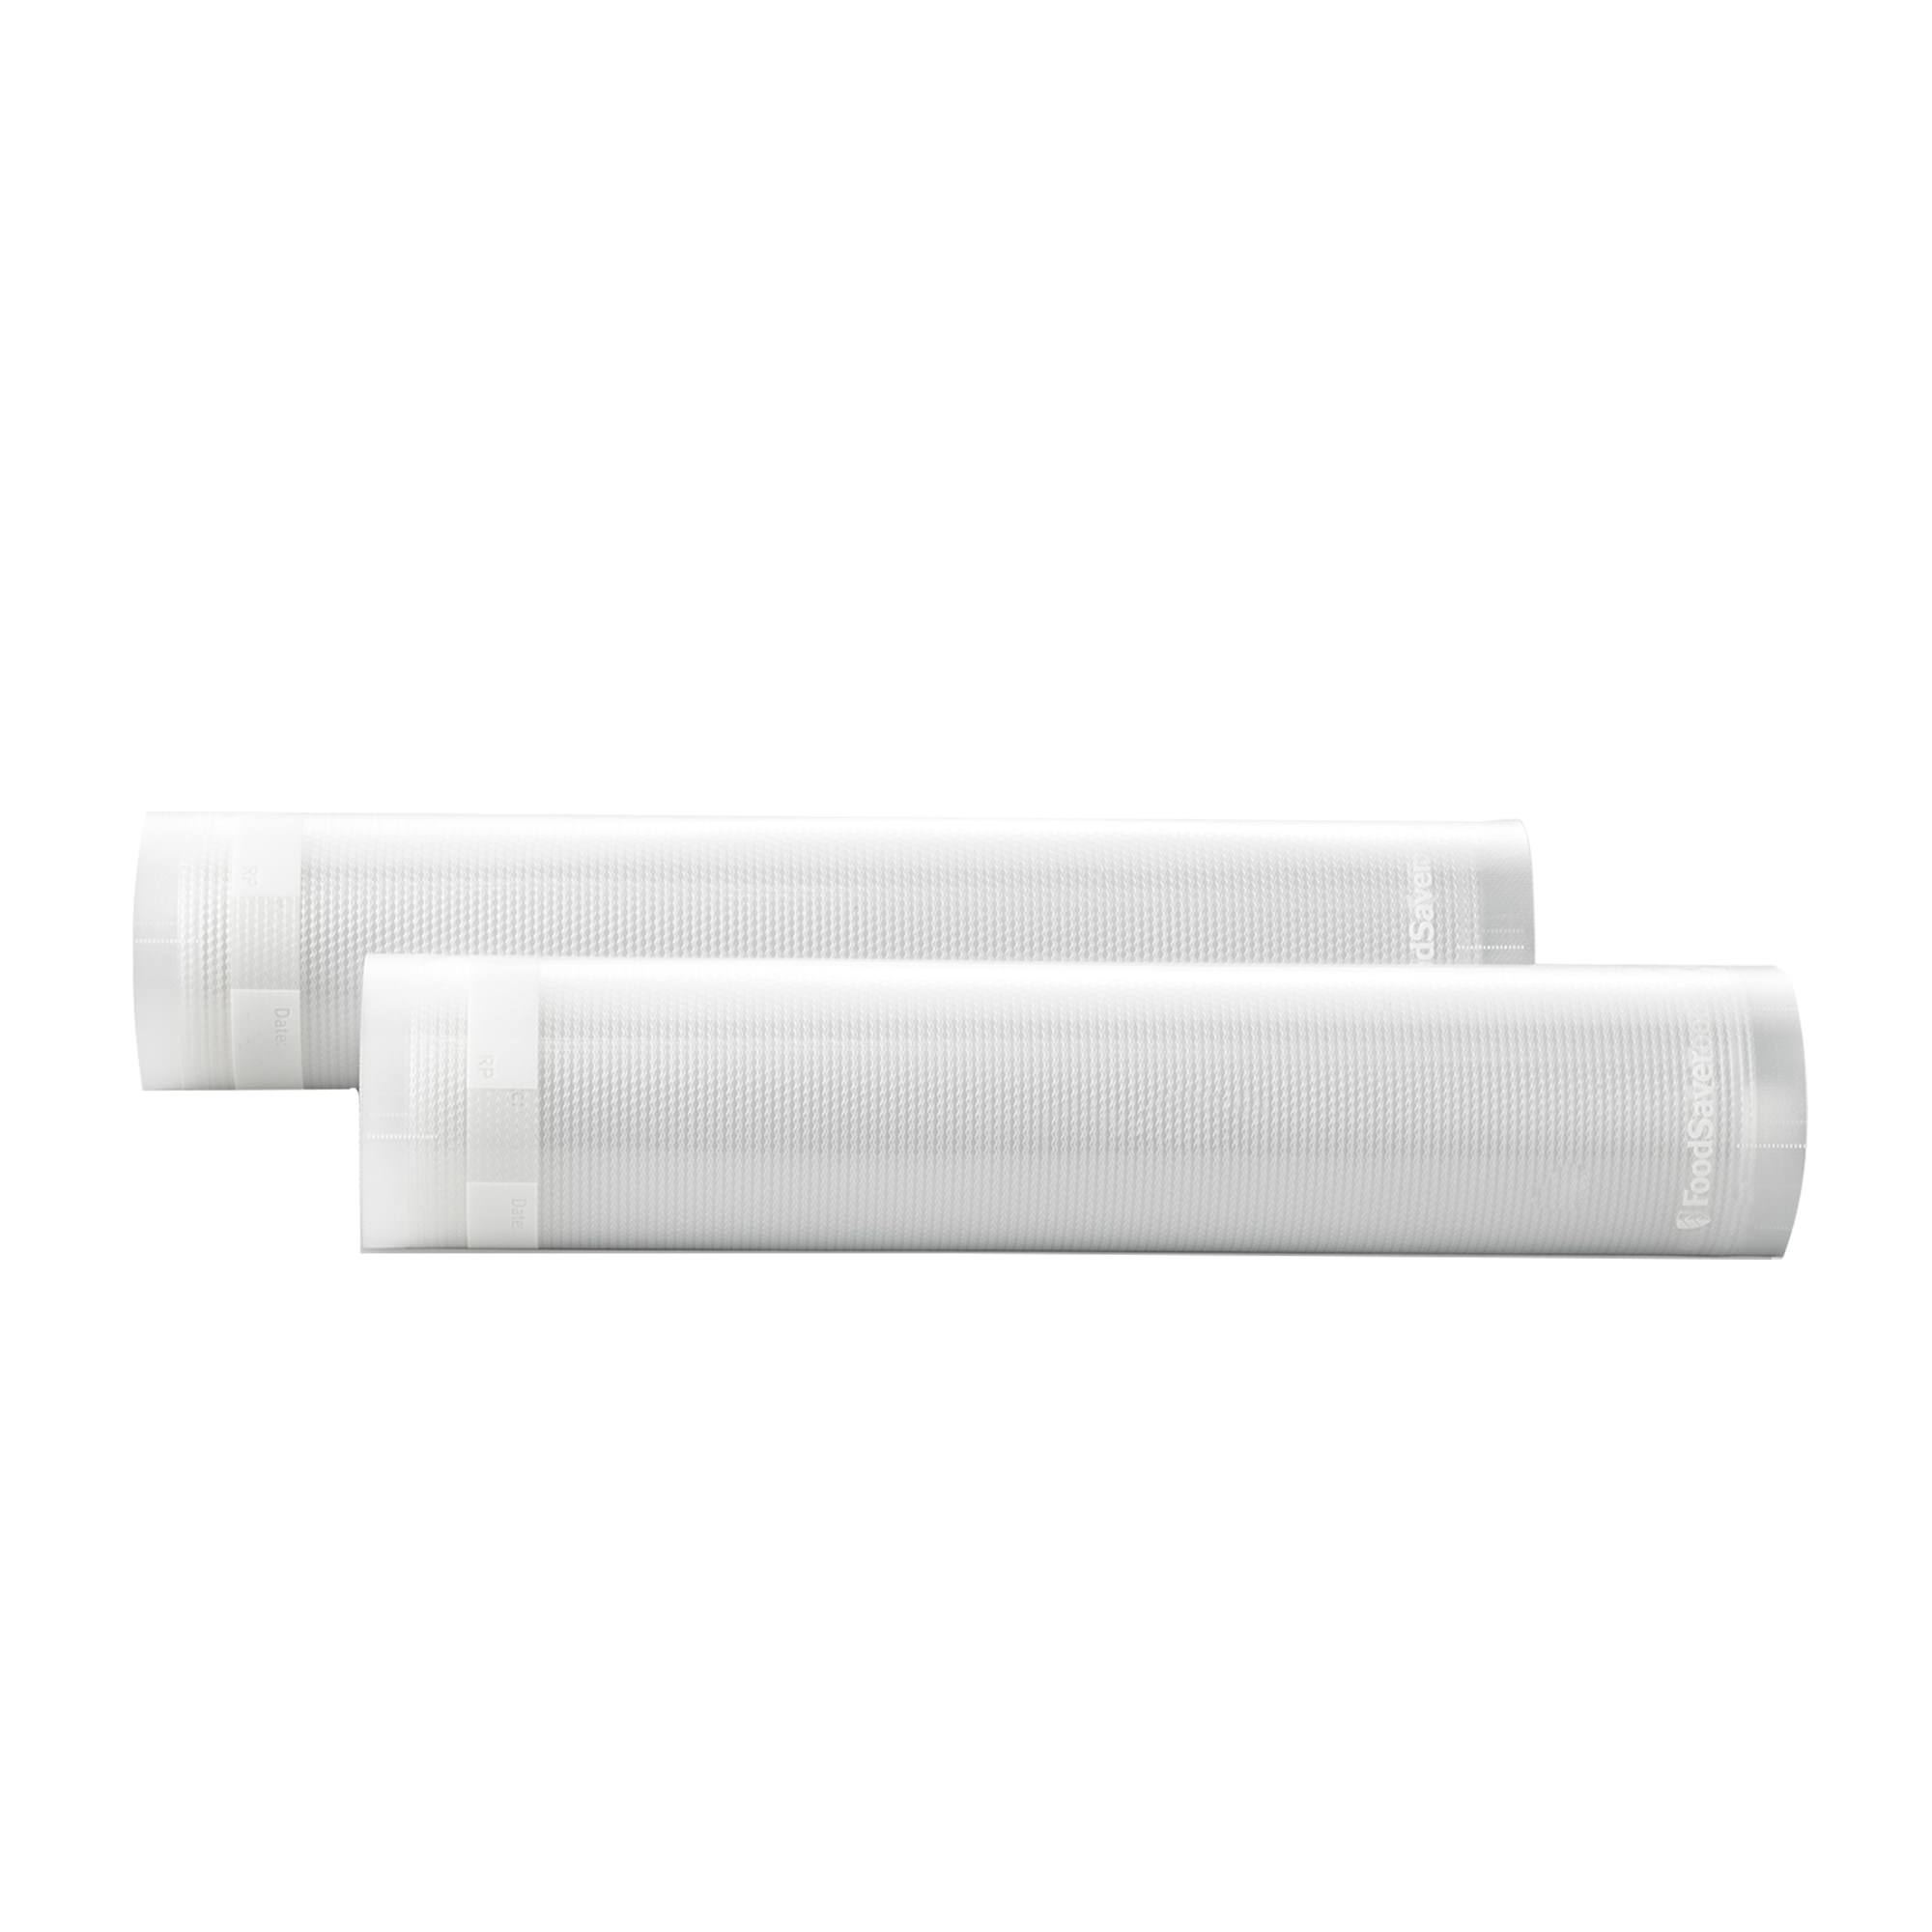 FoodSaver Double Roll 28cm x 5.4m Image 1